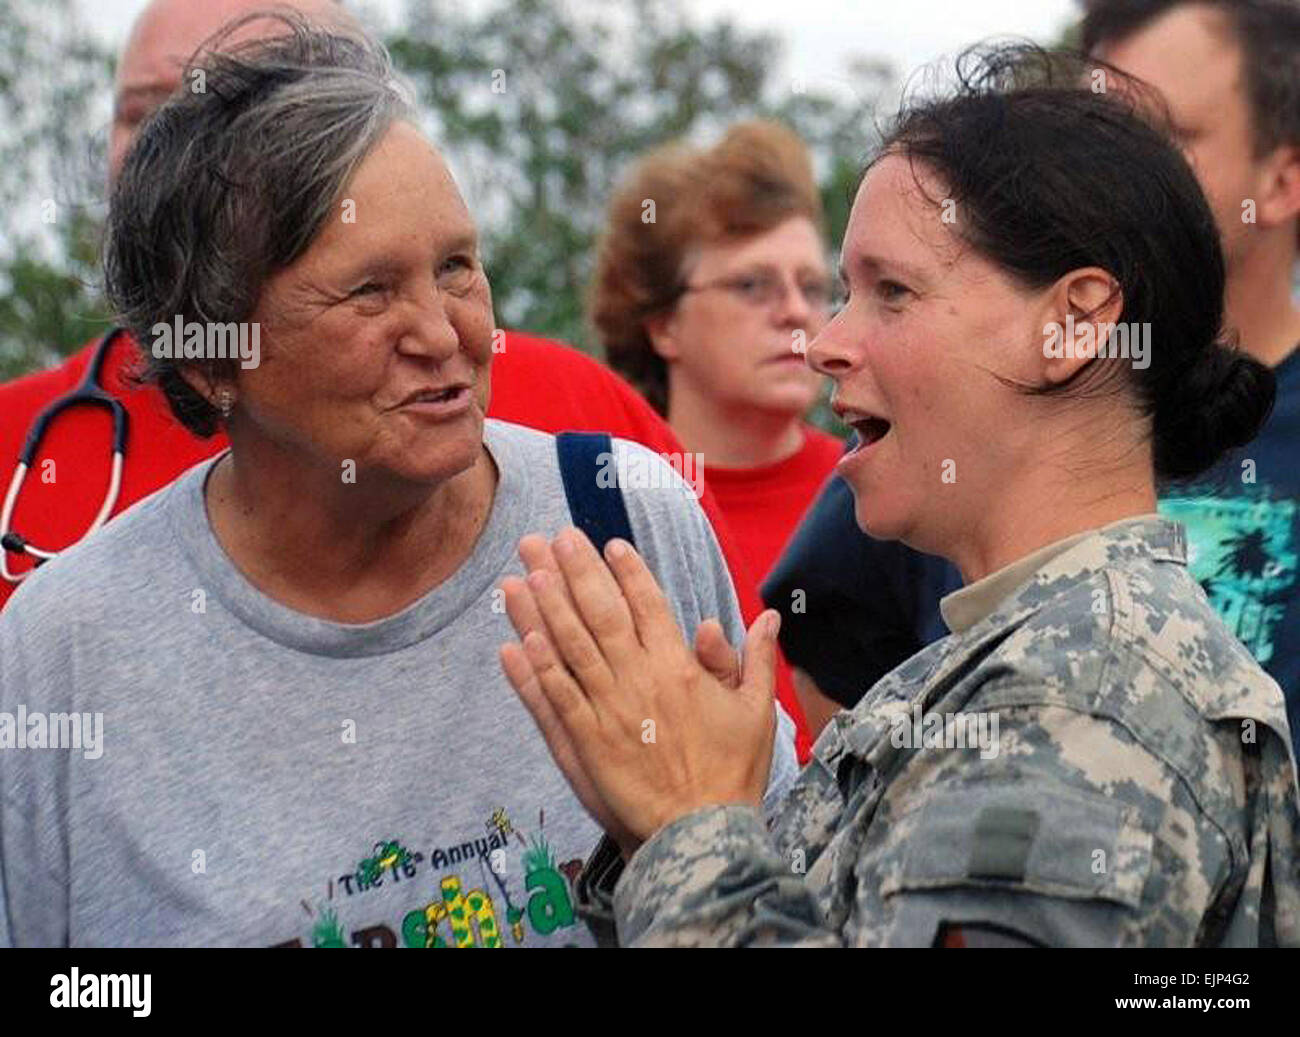 Sgt. Angela Fry, a member of the 528th Engineer Battalion headquartered in Monroe, La., rejoices with her aunt, Beverly Goodwich of Hackberry, La. Members of Fry's family were rescued on Sept. 13, 2008, by the joint efforts of the Louisiana Department of Wildlife and Fisheries, Calcasieu Sheriff's Department, 225th Engineer Brigade and 256th Infantry Brigade Combat Team after Hurricane Ike flooded the isolated southwestern Louisiana community.  Sgt. Rebekah L. Malone, 225th Engineer Brigade. Stock Photo